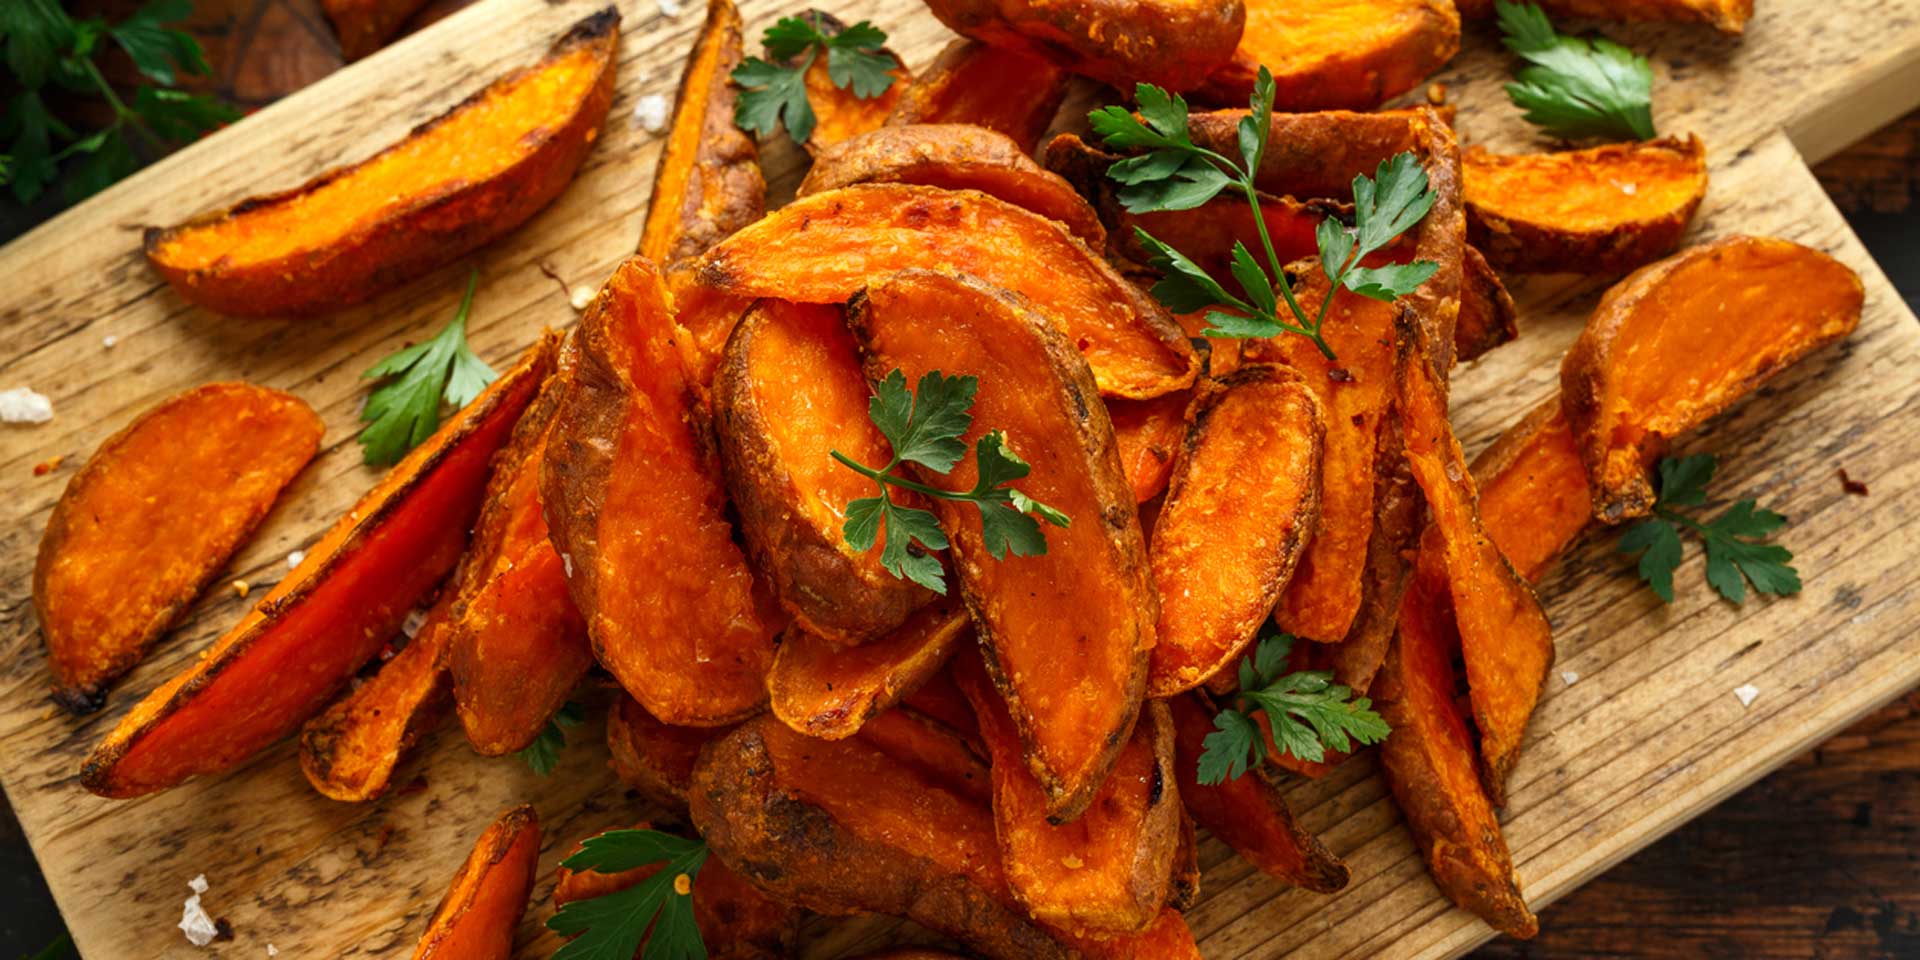 A wooden cutting board piled with crispy roasted sweet potato wedges garnished with fresh parsley and imbued with new age product energies.